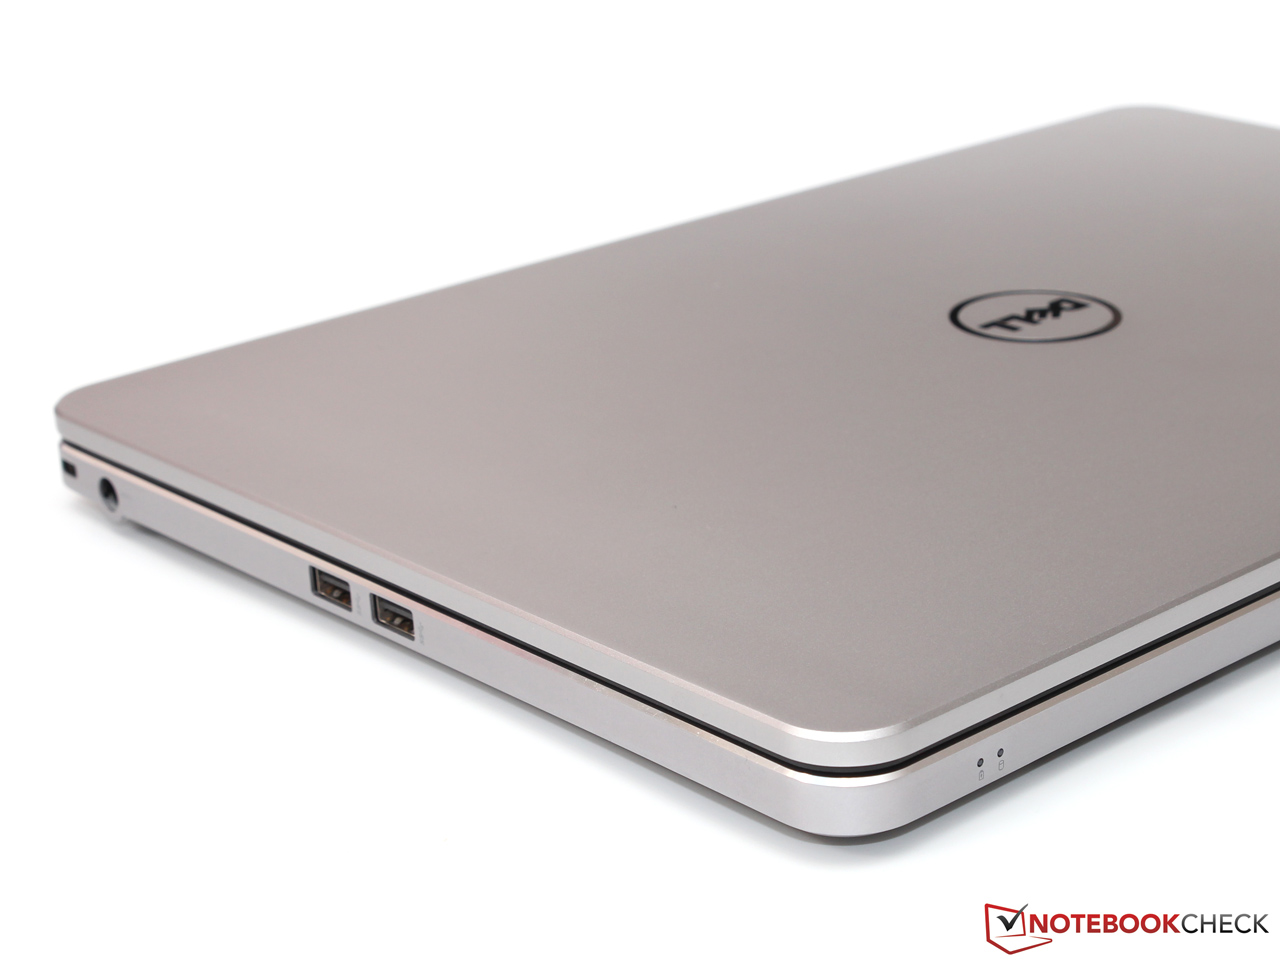 Review Dell Inspiron 157537 Notebook  NotebookCheck.net Reviews